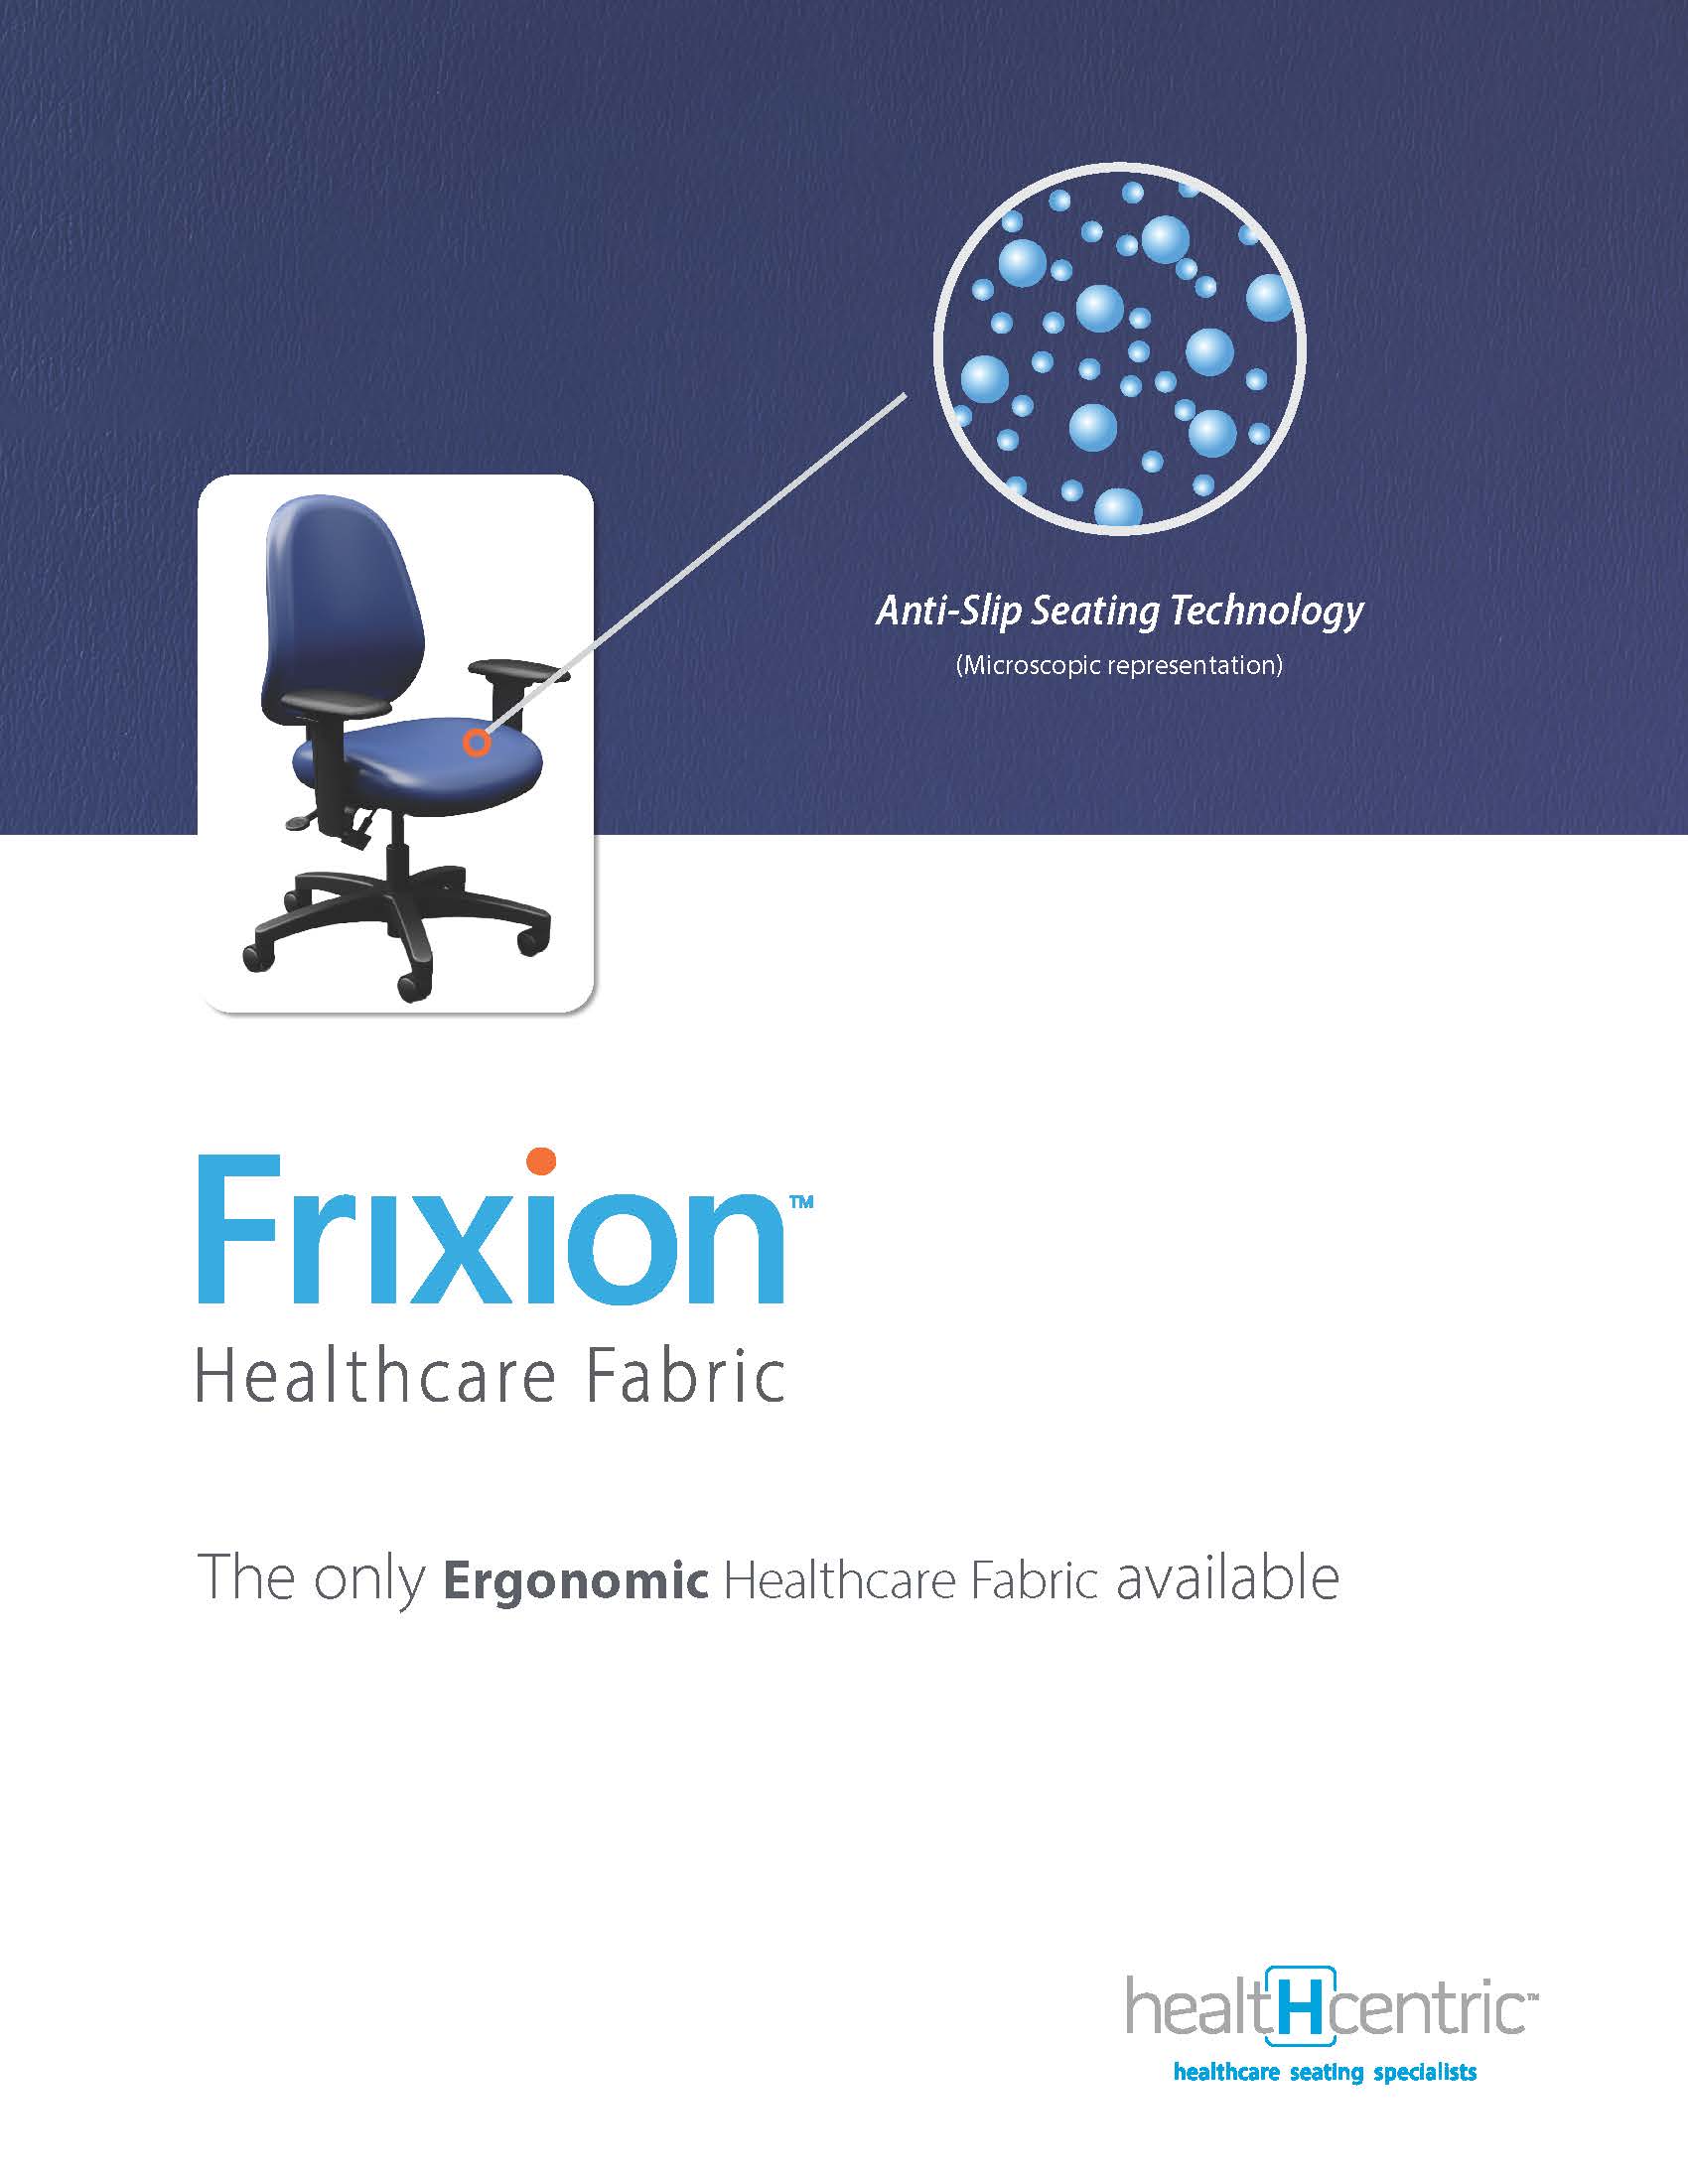 Frixion Healthcare Fabric